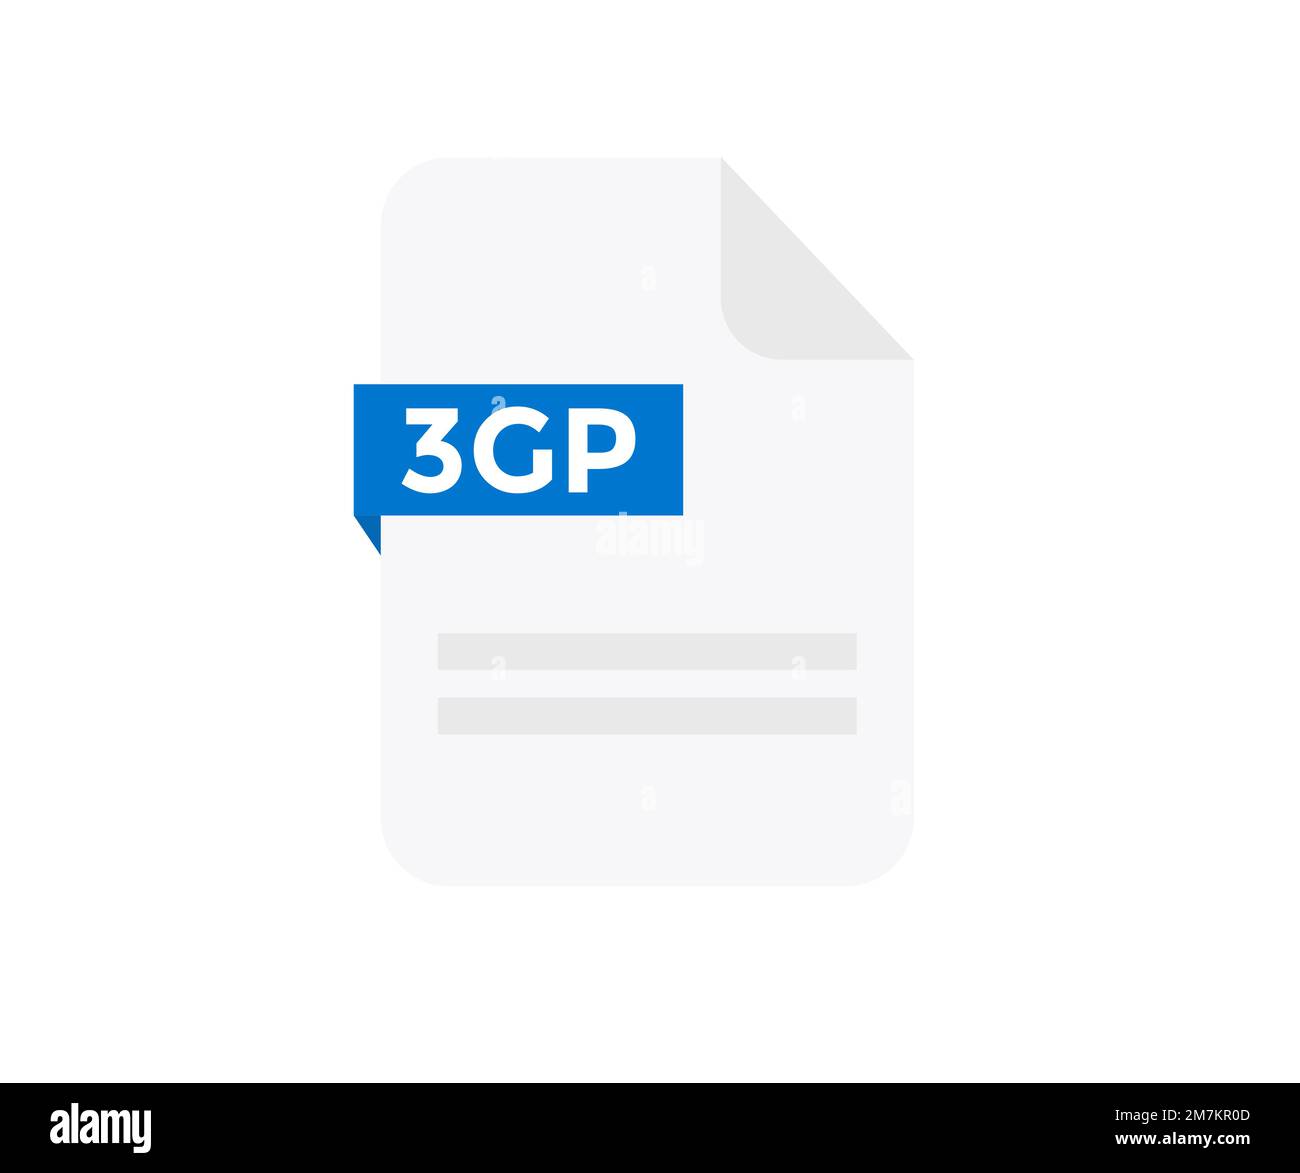 File format 3GP logo design. Document file icon. Element for applications, web sites & data services. Format and extension of documents vector design. Stock Vector